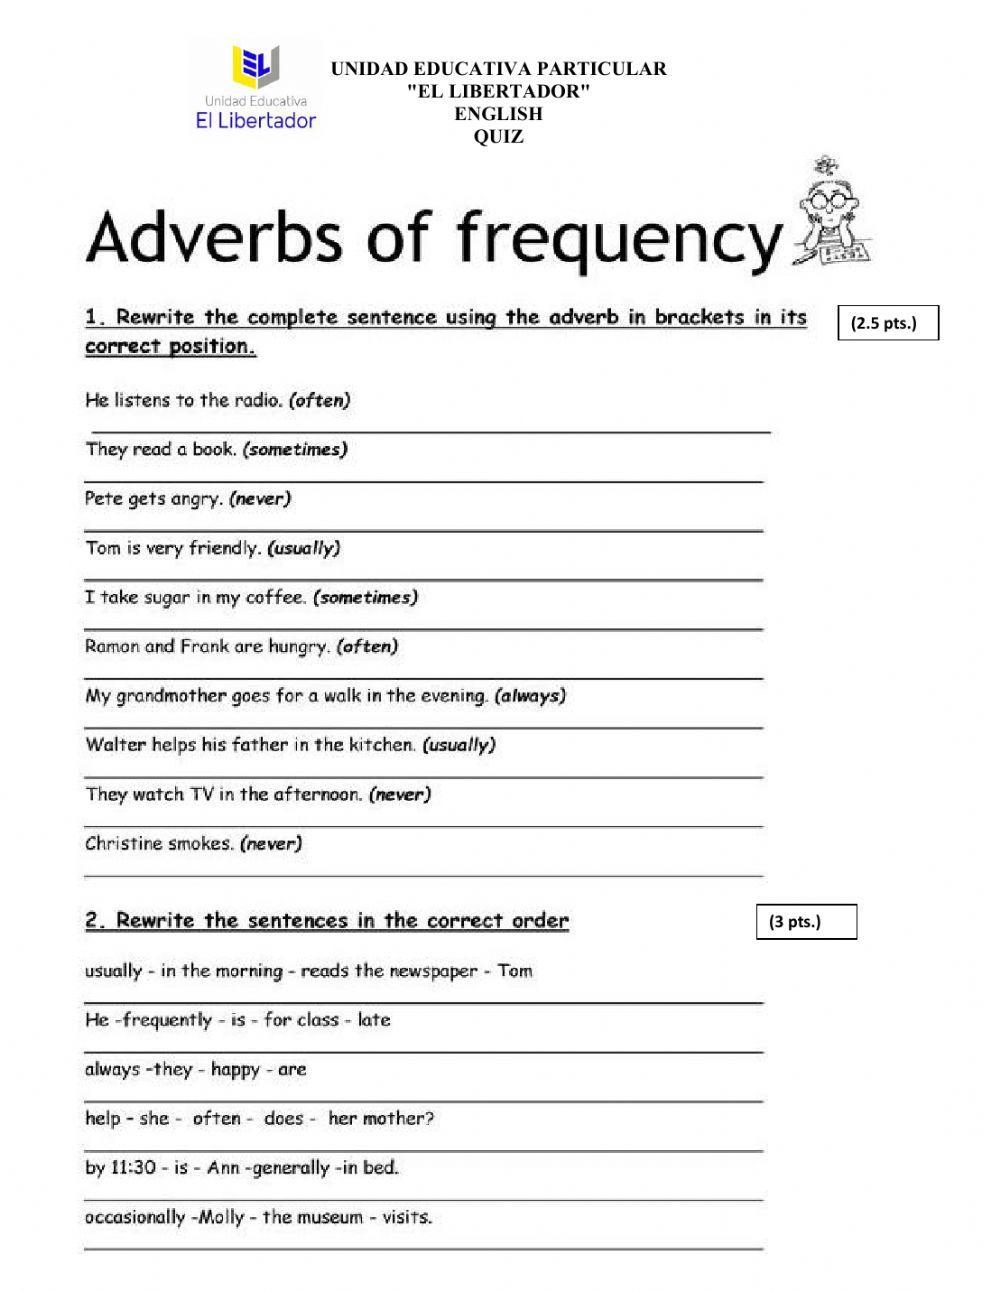 Quiz - Adverbs of frequency - Prepositions of time